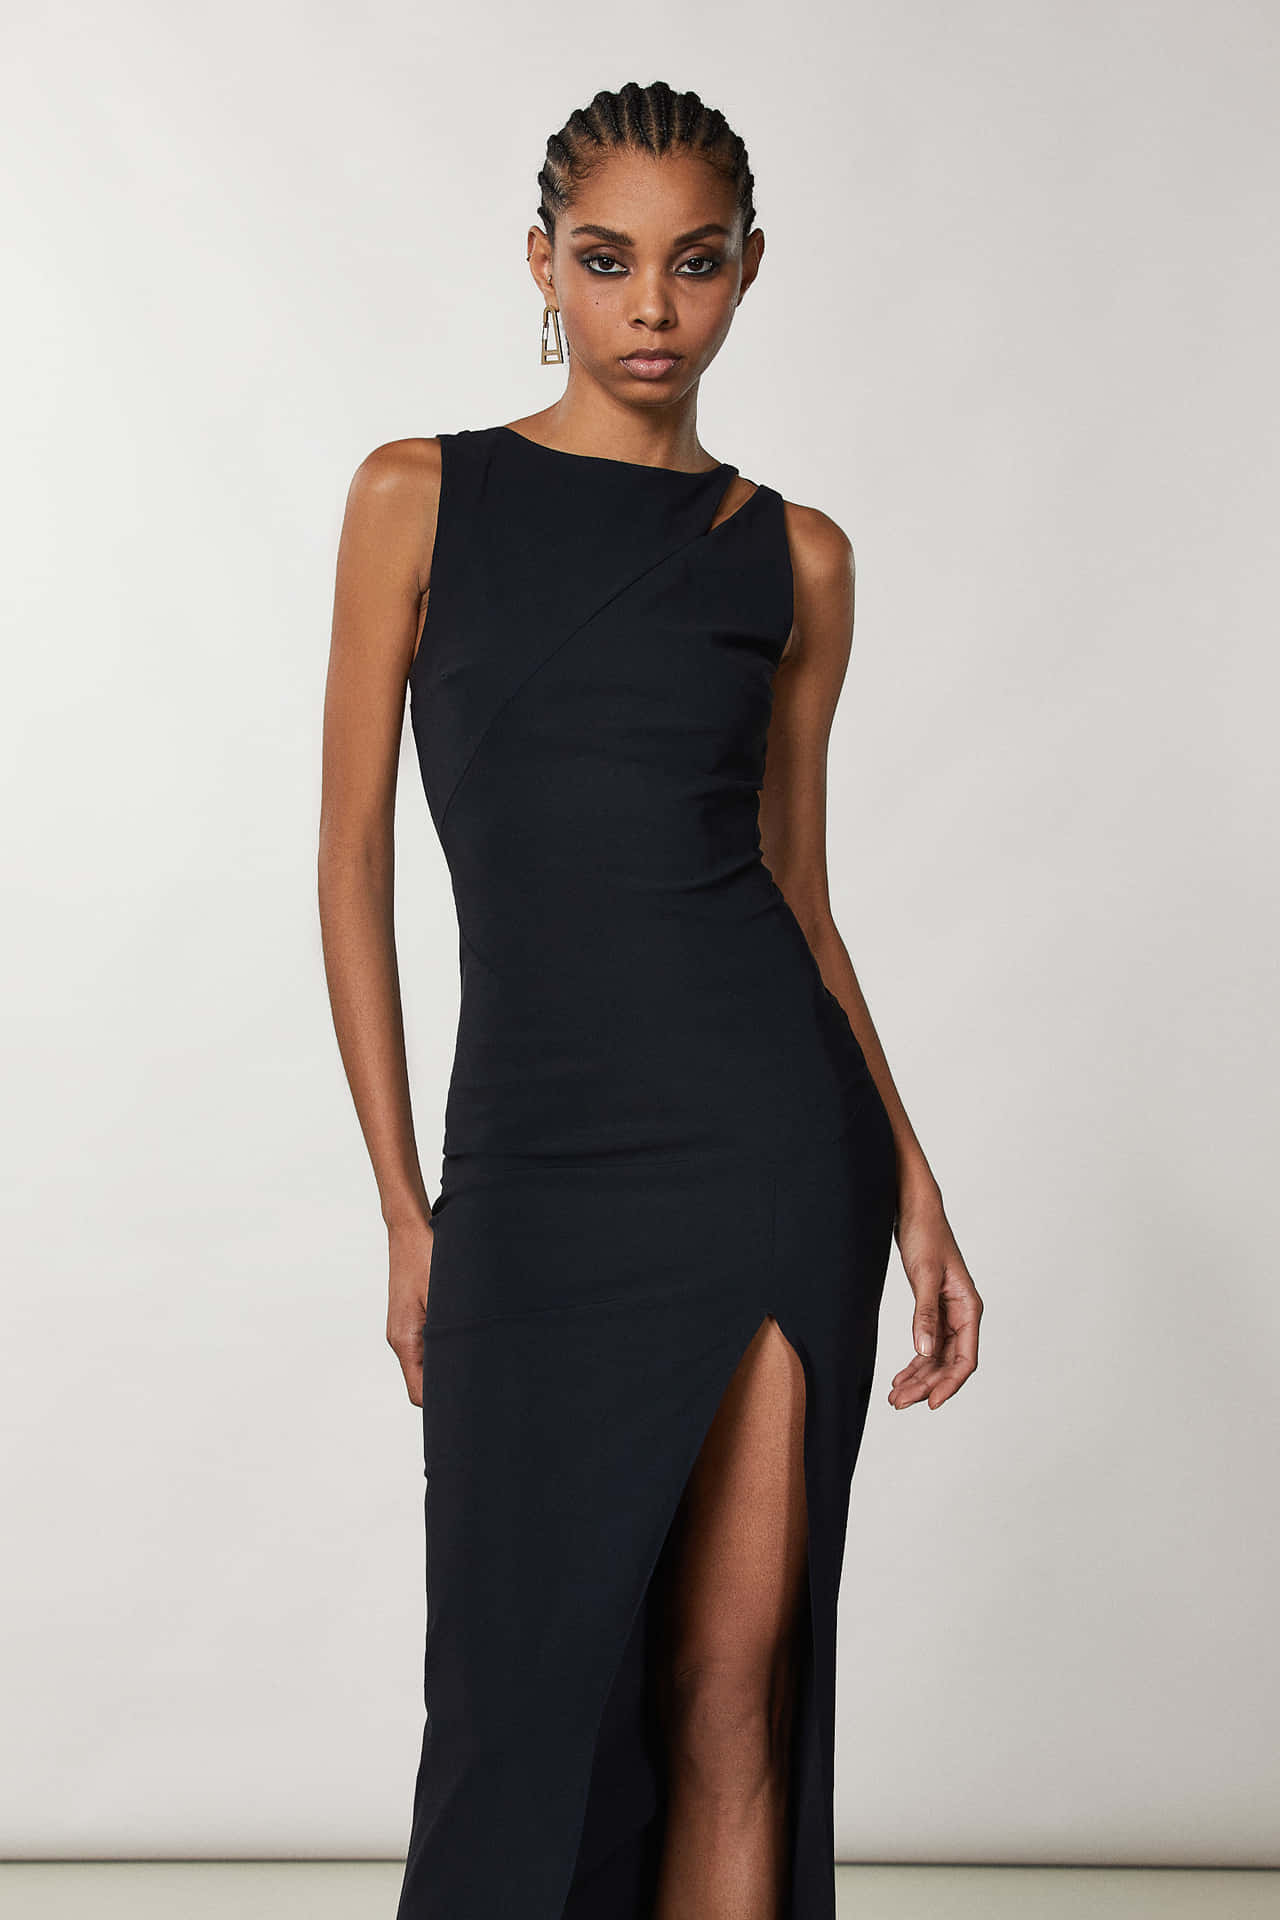 Model In Black Long Dress With A Slit Picture